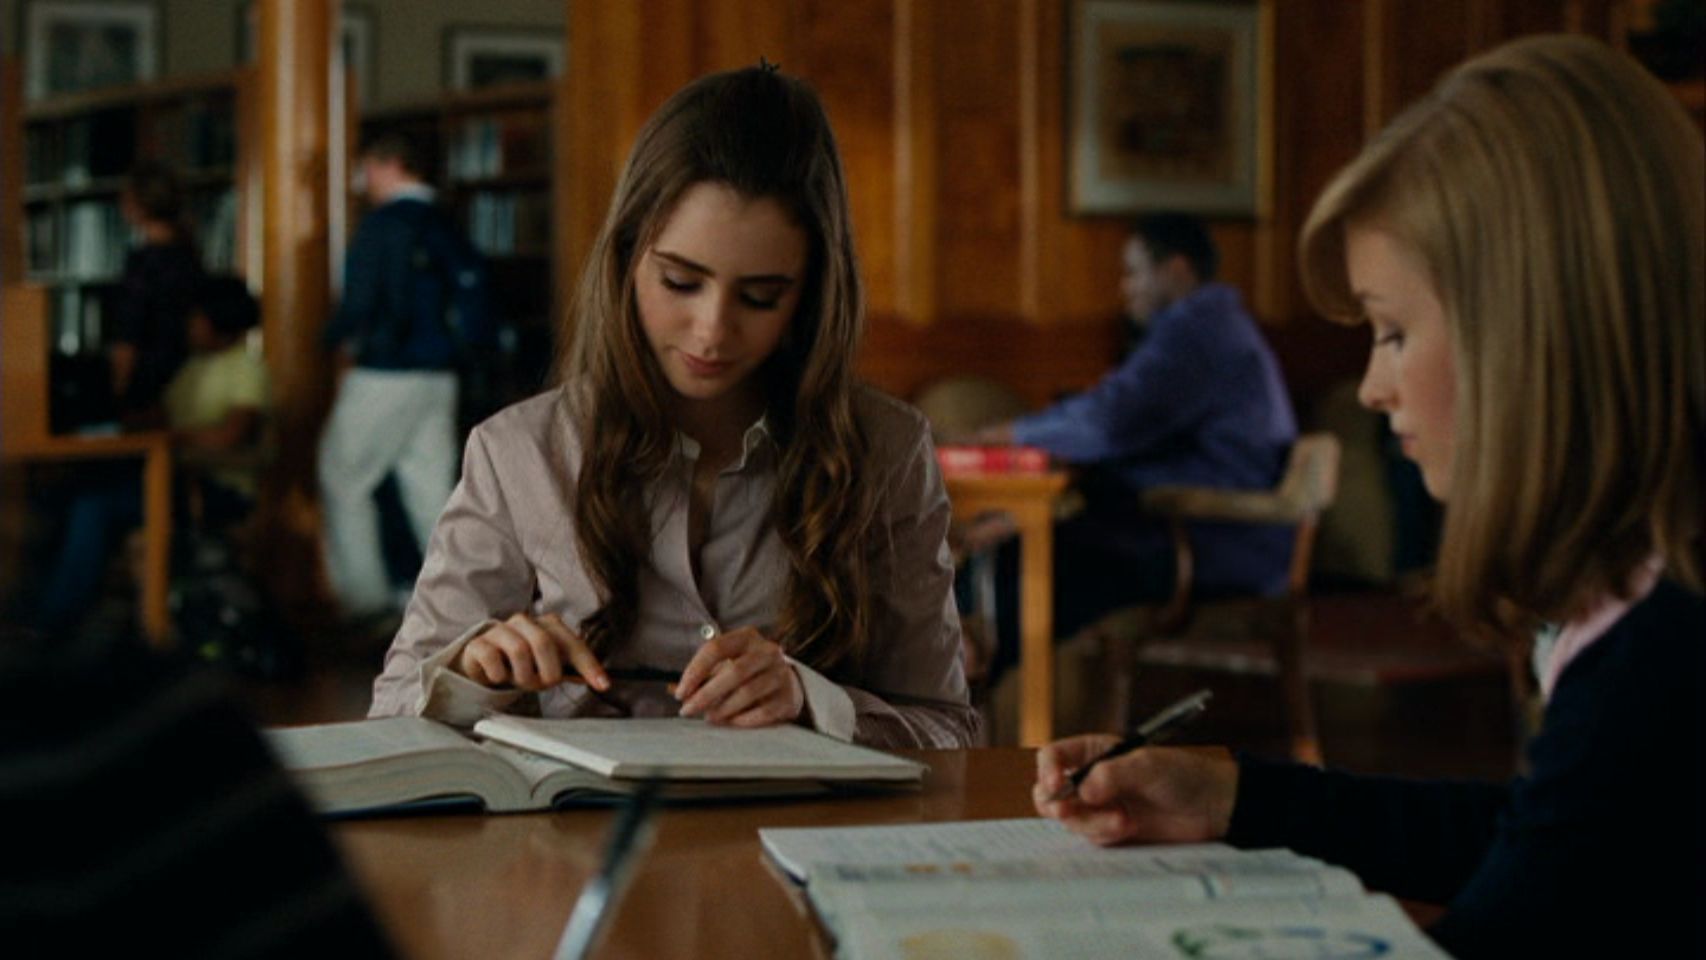 The Blind Side - Lily Collins Image (21307065) - Fanpop